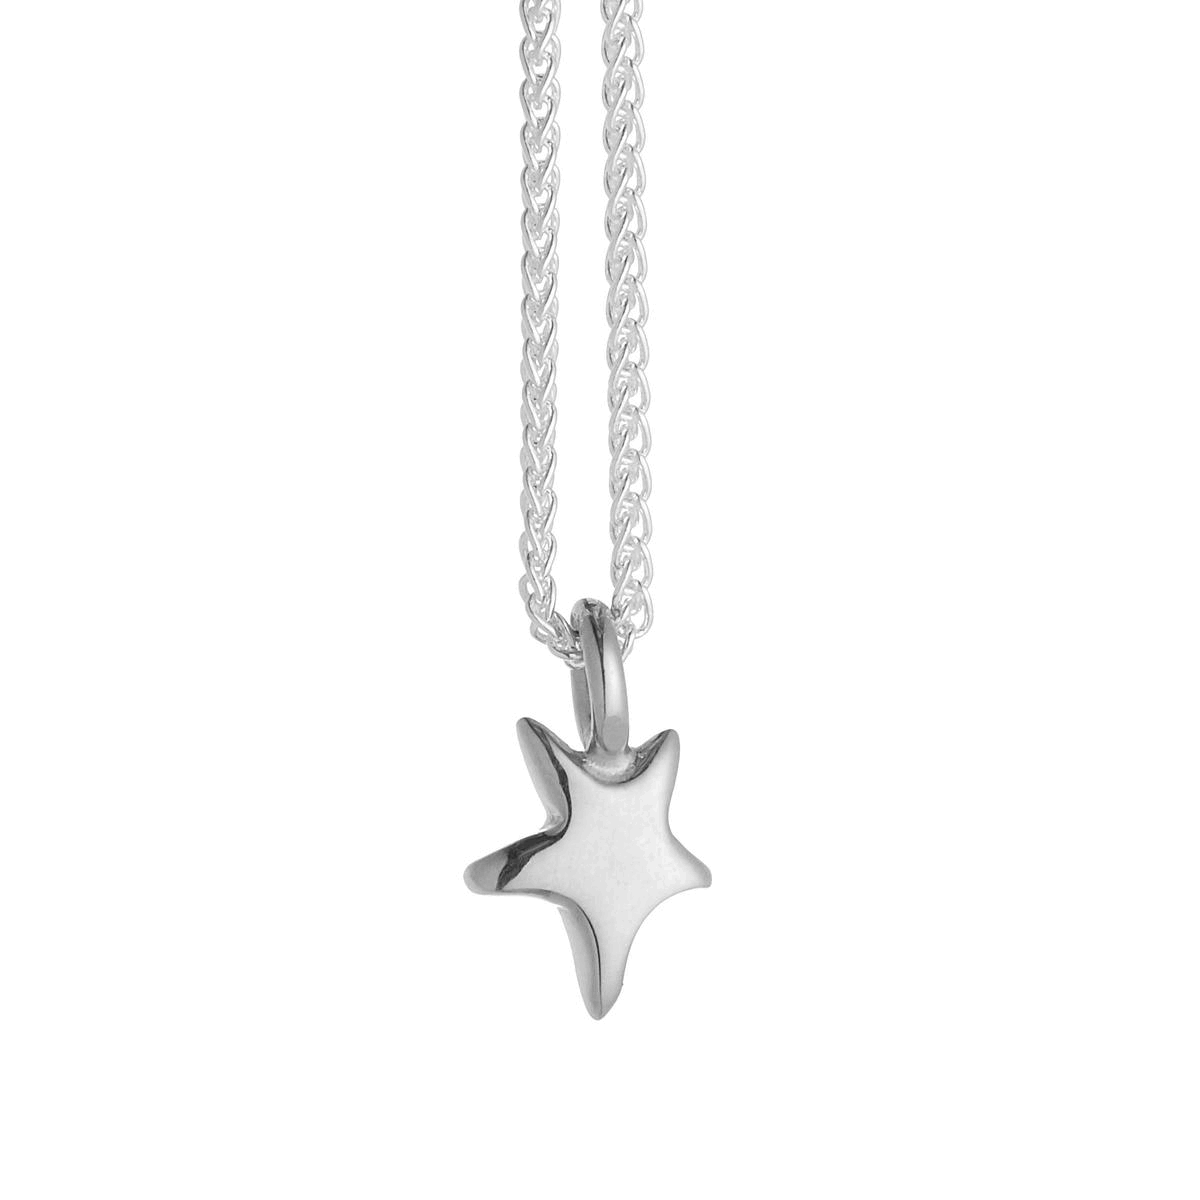 Delicate solid silver star pendant for teens young womens gift designer Scarlett Jewellery